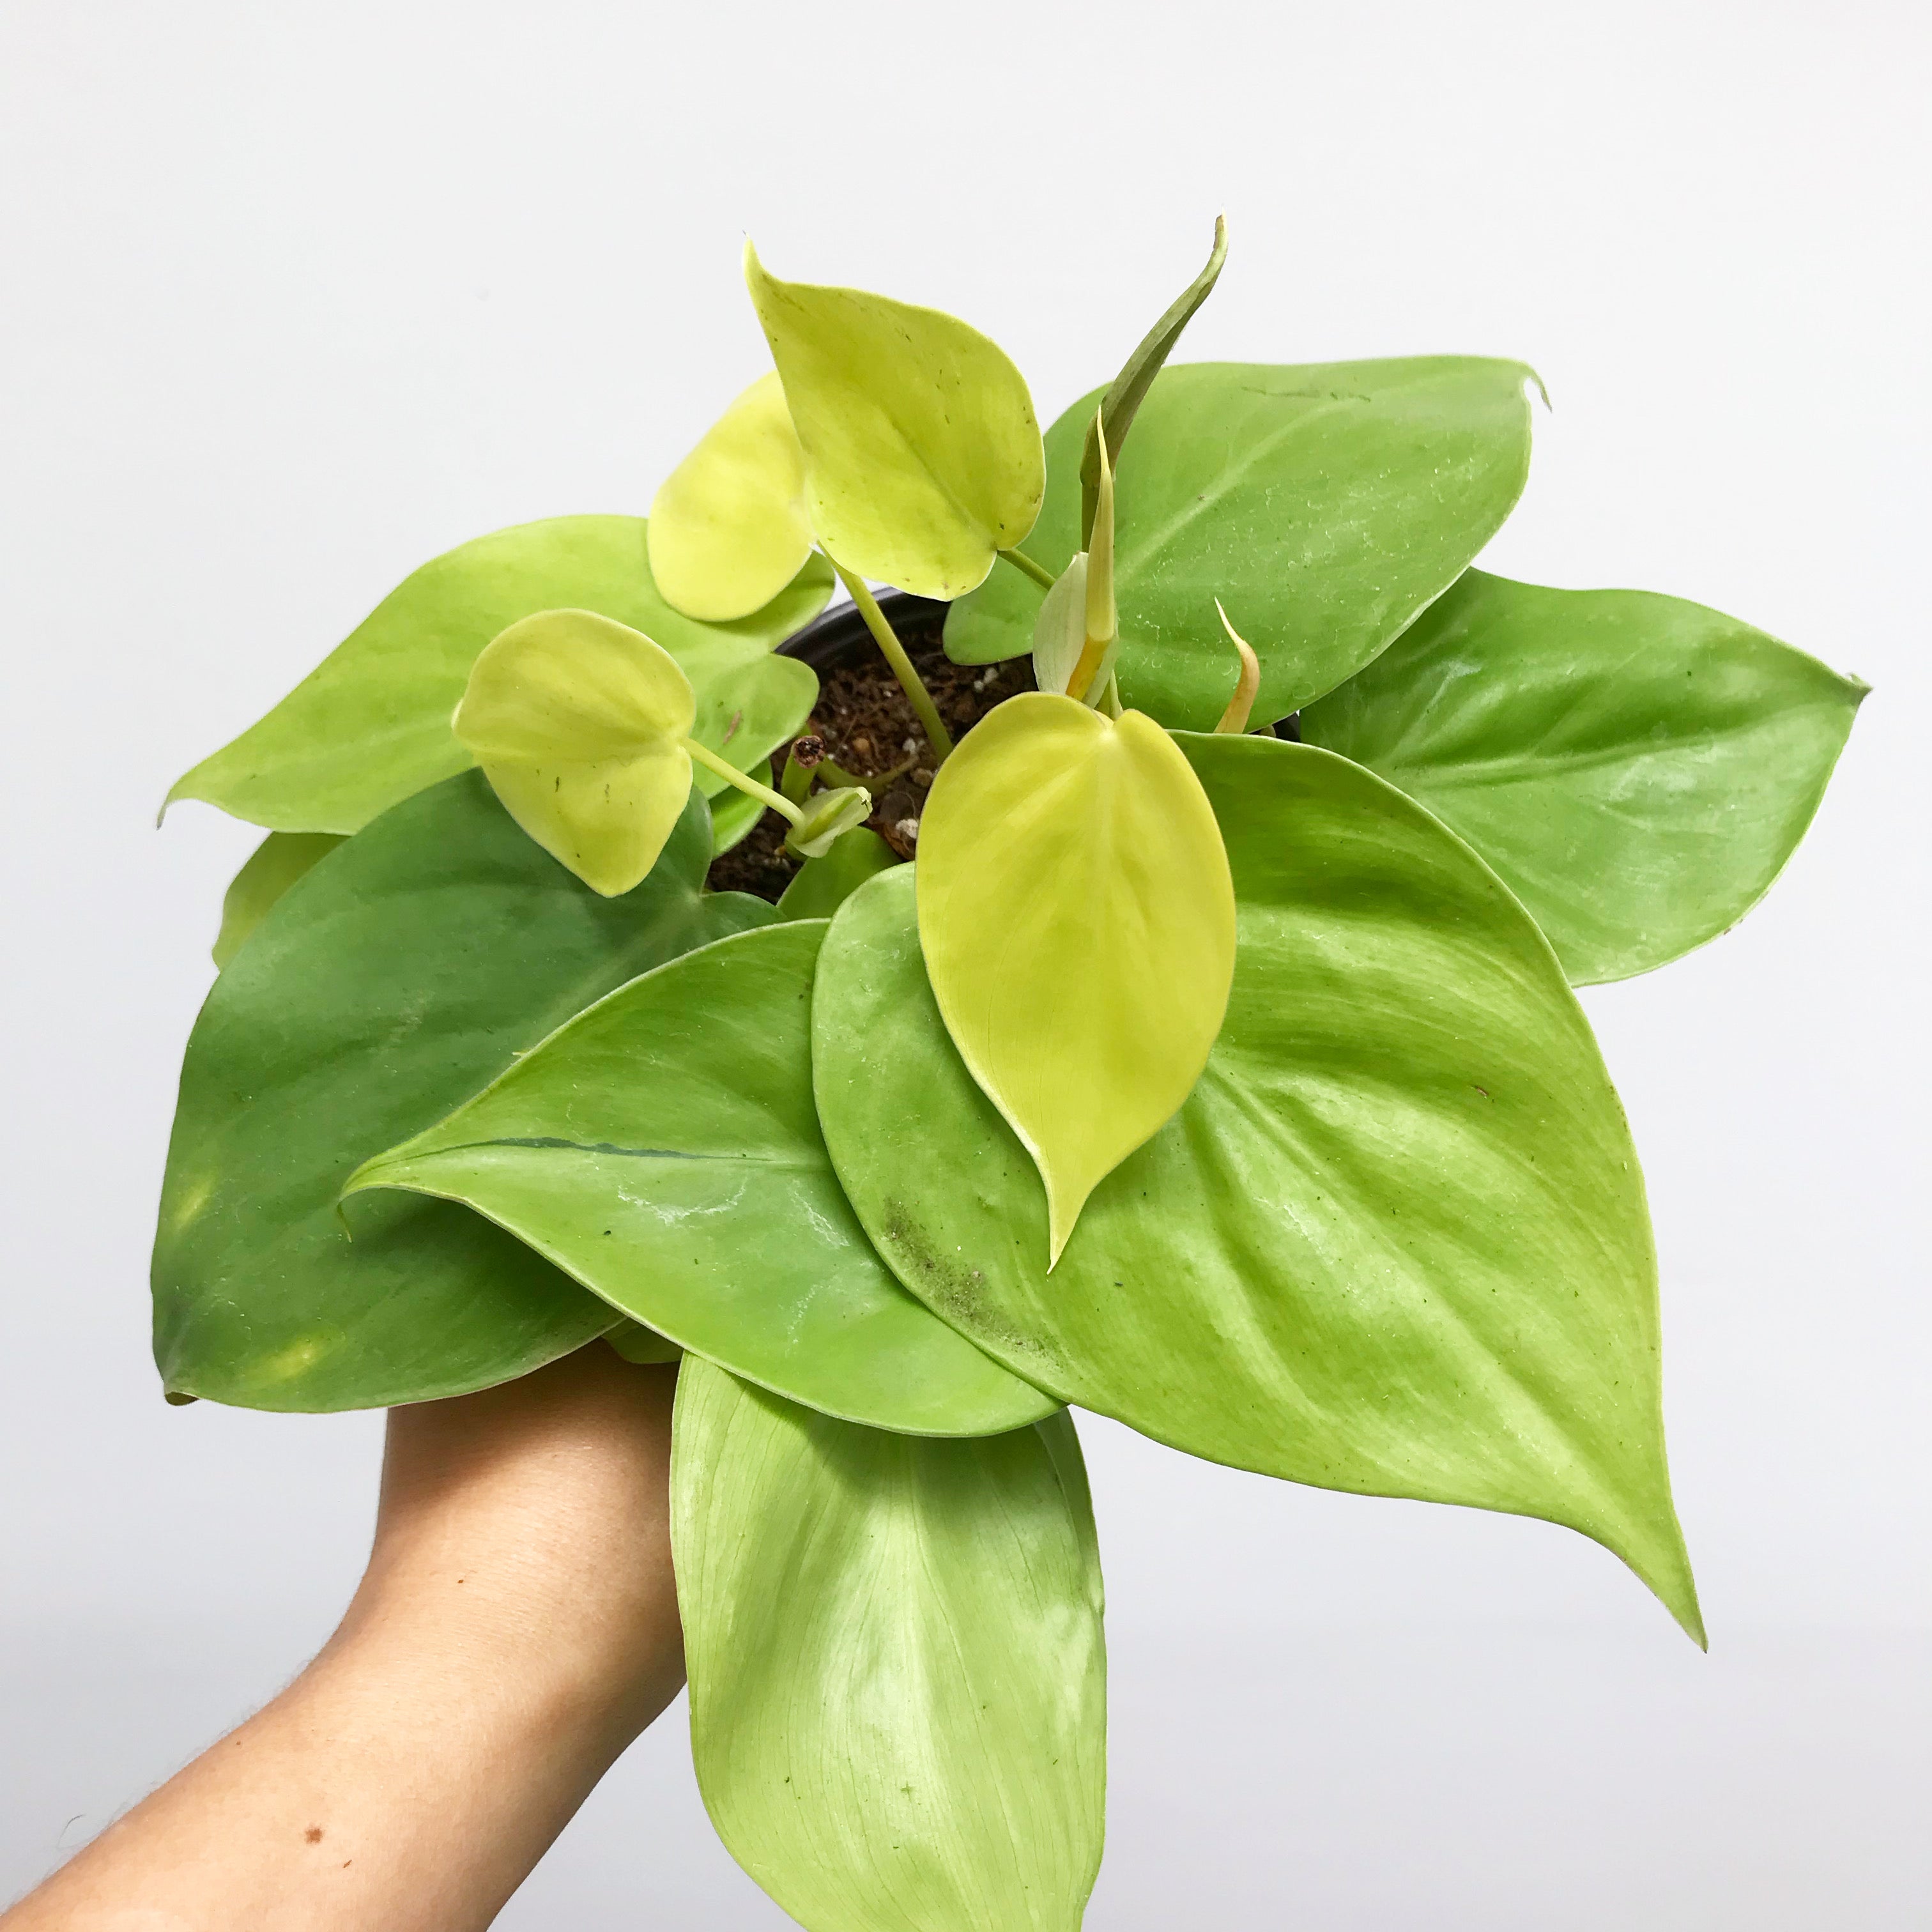 Philodendron hederaceum 'Neon' - Heartleaf Philodendron